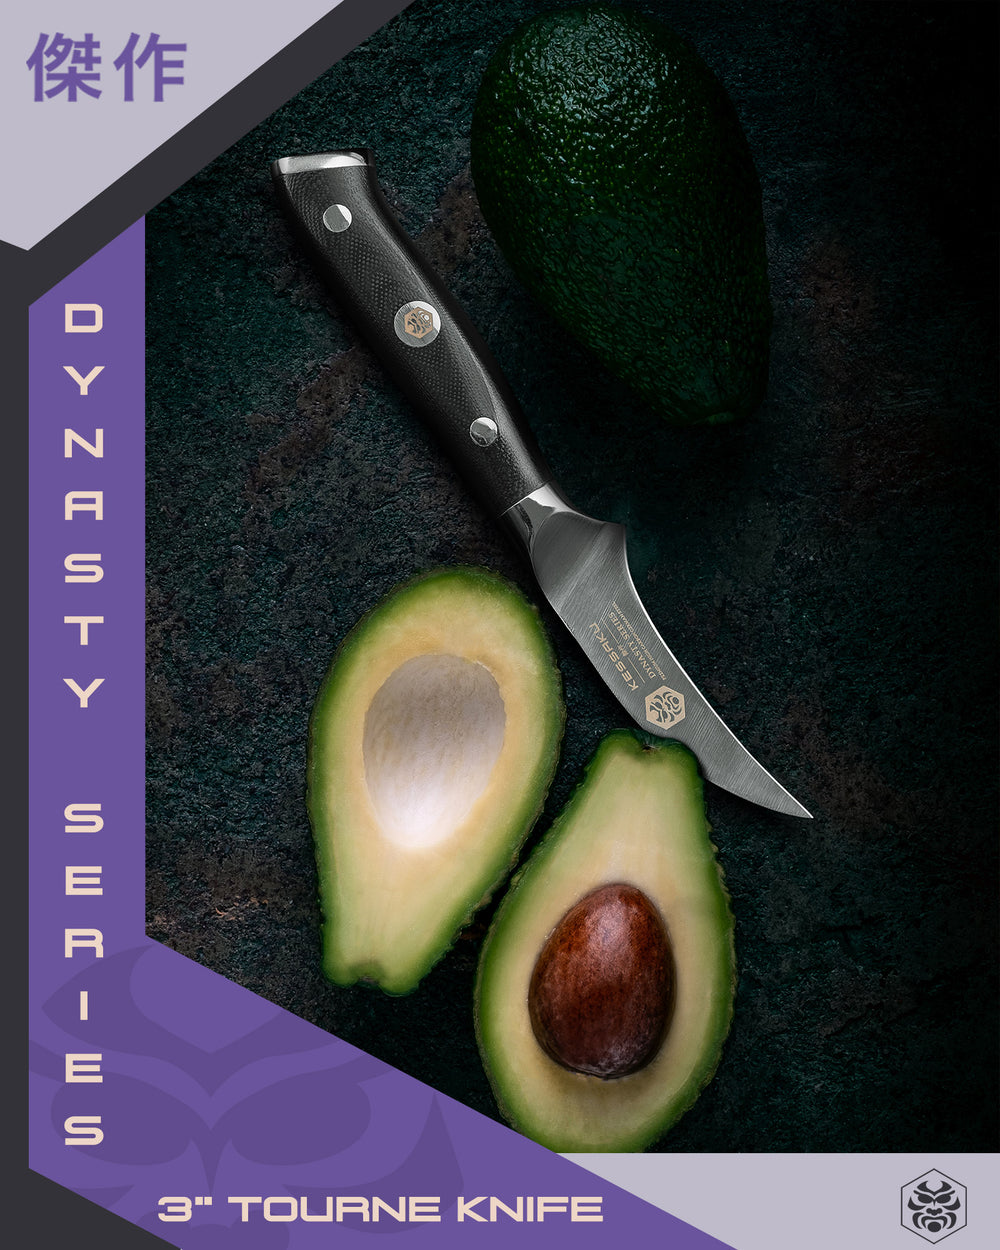 The Dynasty Tourne Knife after halving an avocado